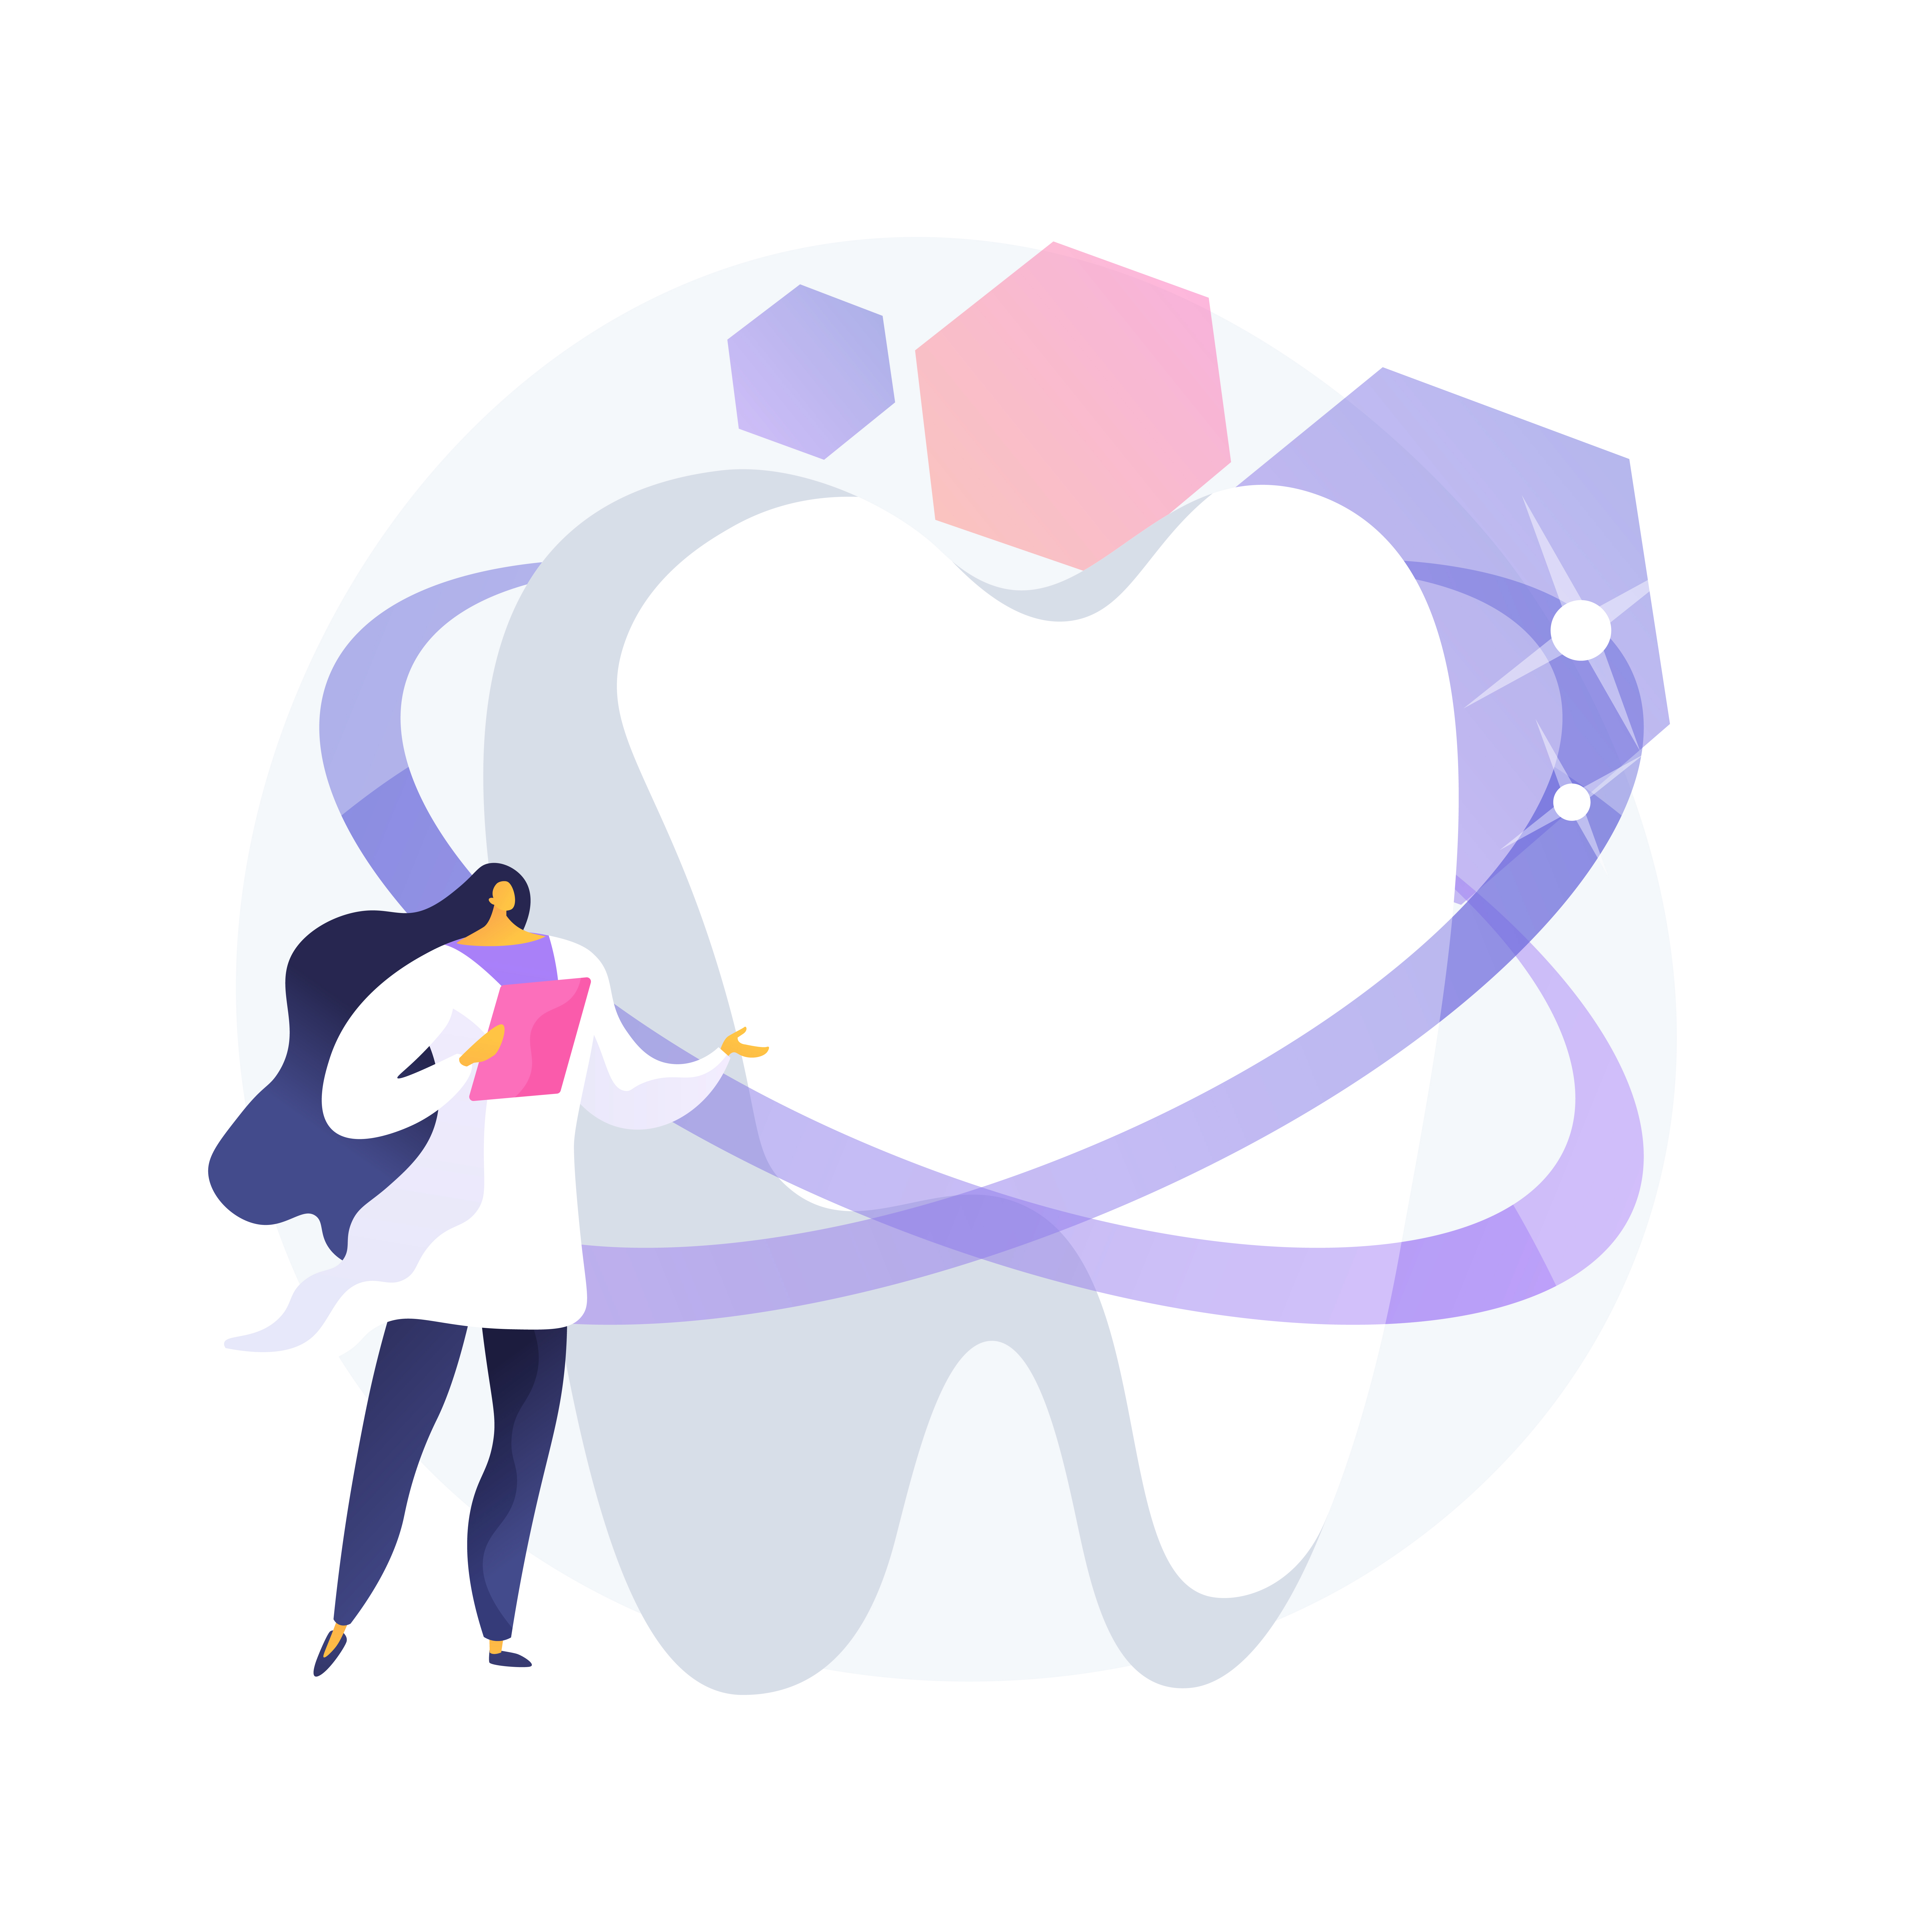 A stylized illustration of a large tooth and a human figure that
              appears to be a dentist, indicating the importance of dental care. The
              image has an artistic and colorful style, and appears to have an
              educational or informational purpose about dental care.